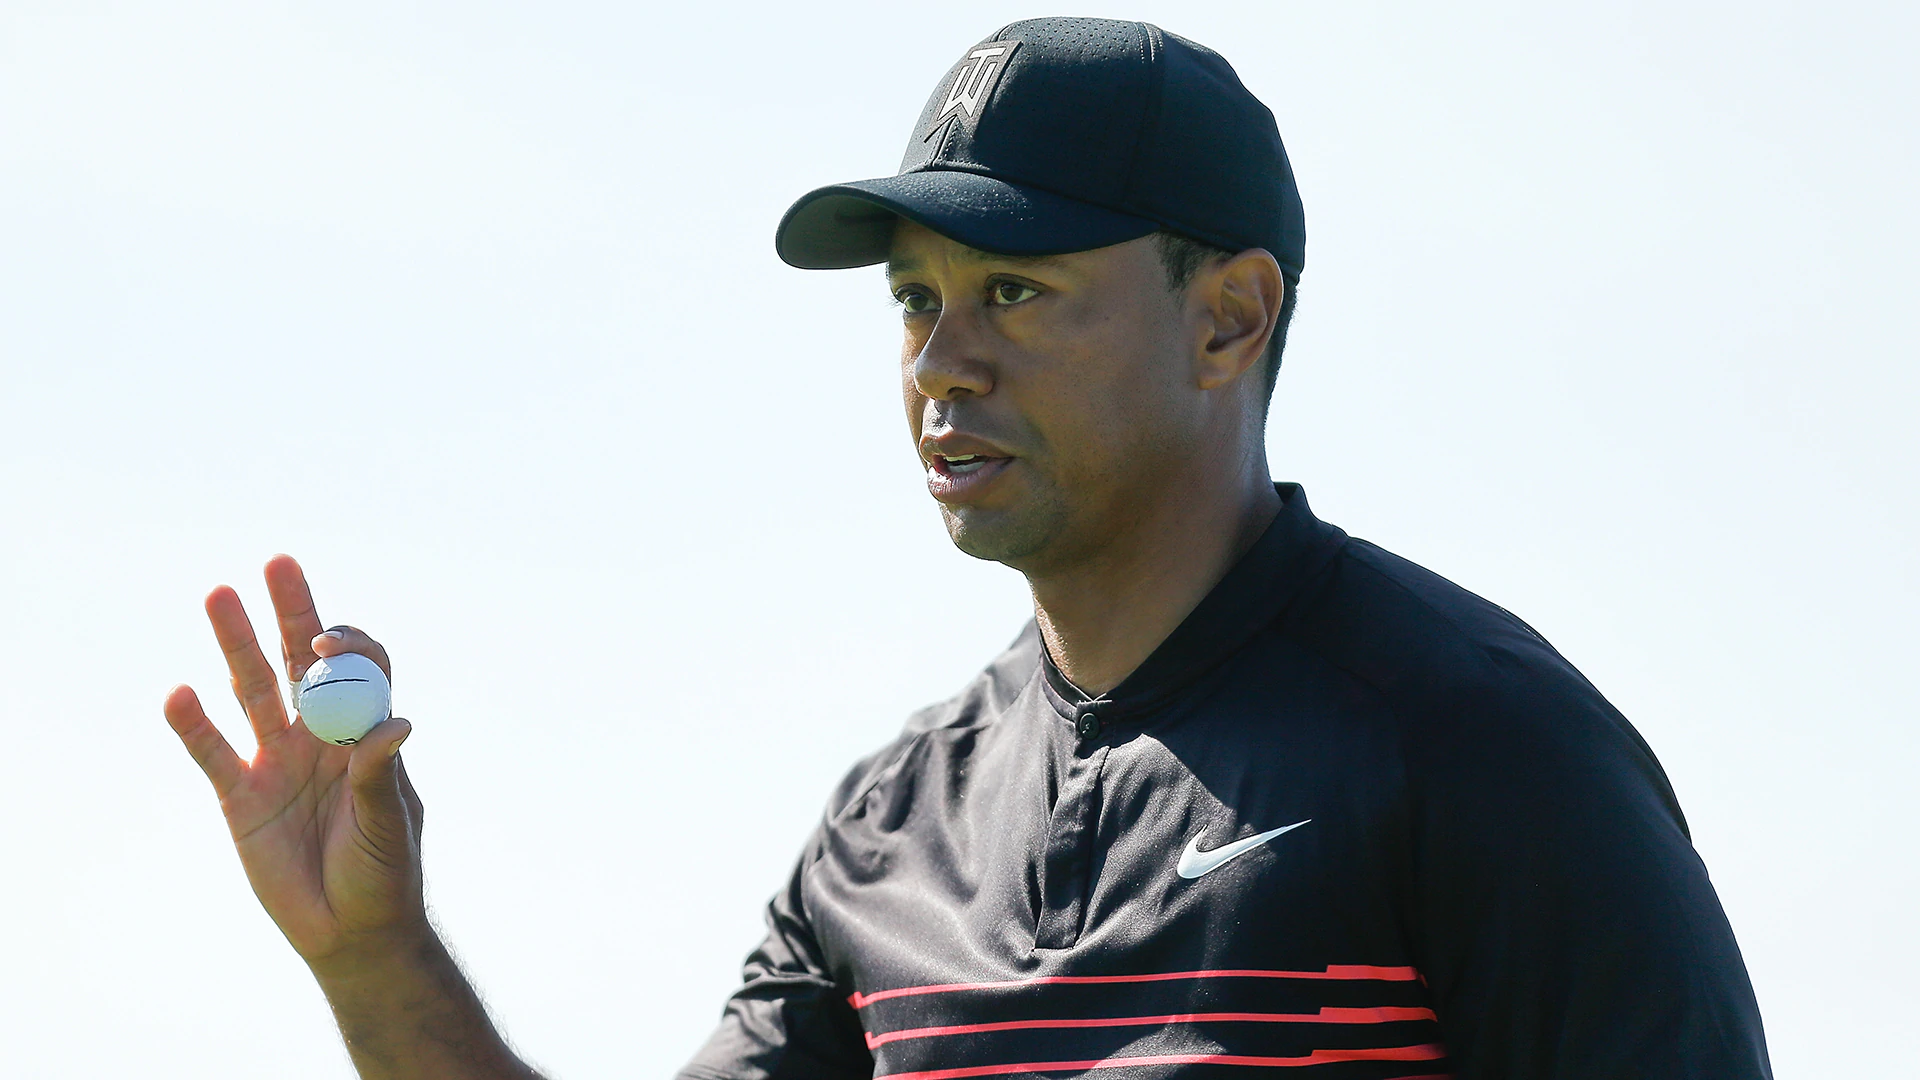 Watch: Tiger's Thursday birdies (and near-ace at 16)